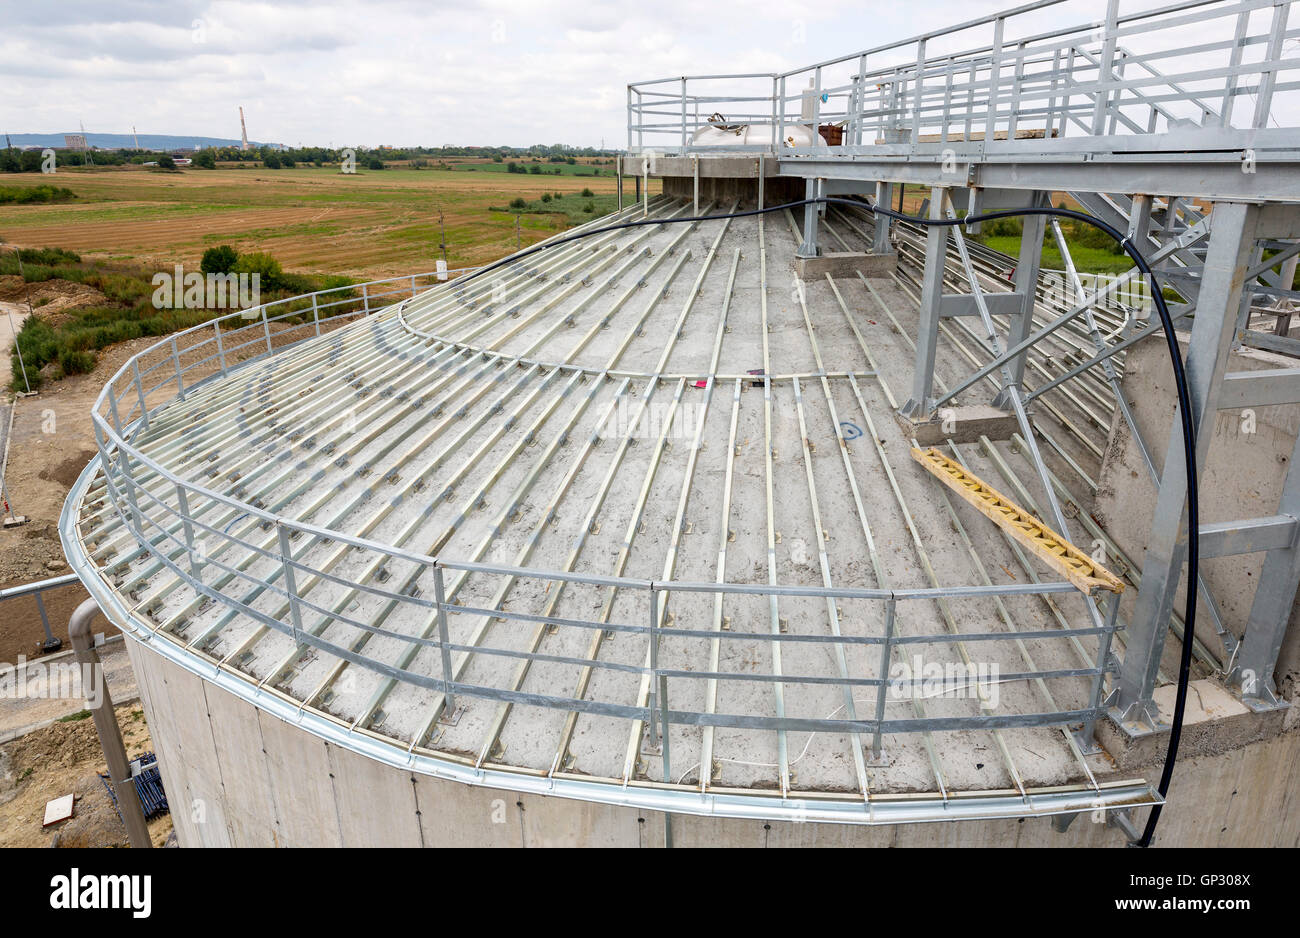 Wastewater treatment plant. Wastewater treatment is a process used to convert dirty wastewater into an effluent that can be eith Stock Photo